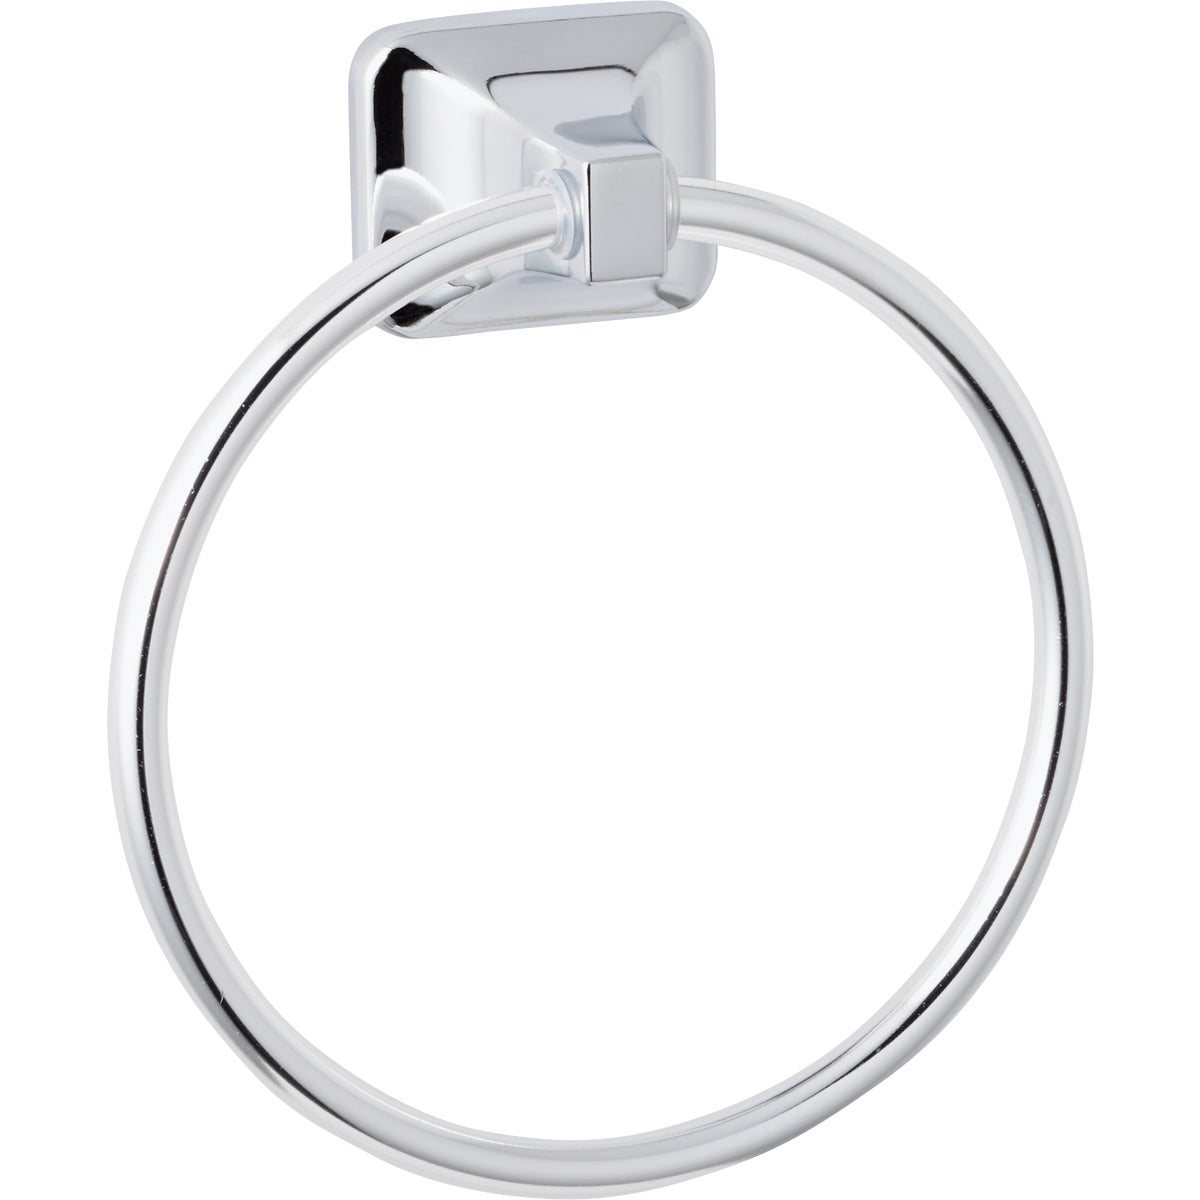 Item 409105, Vista series zinc die-cast wall mount towel ring with concealed mounting 